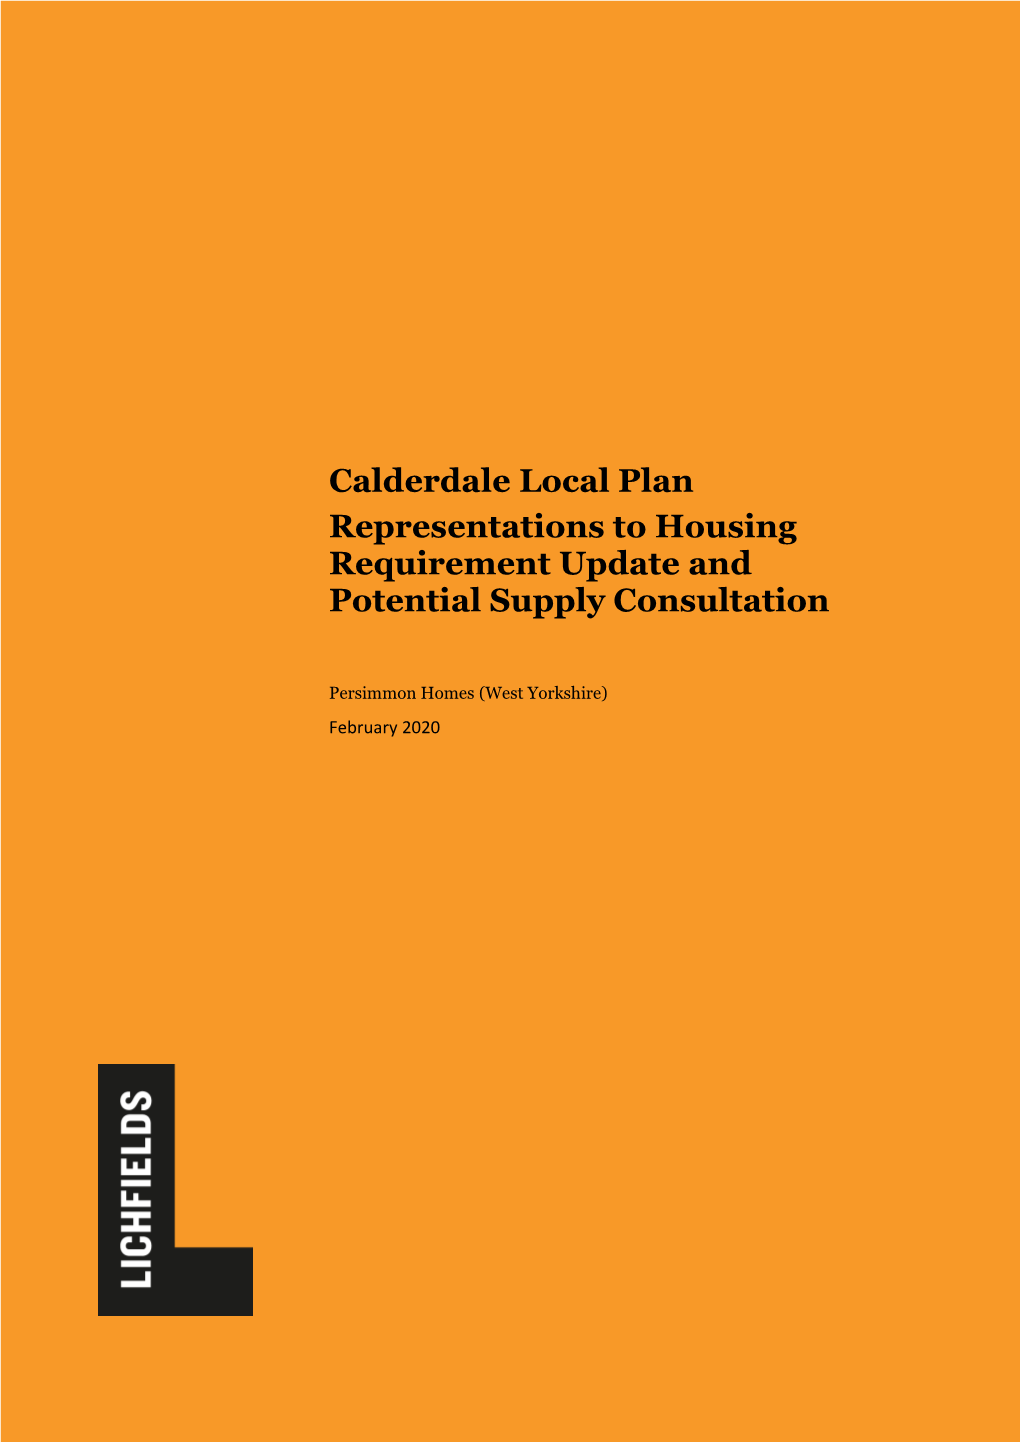 Calderdale Local Plan Representations to Housing Requirement Update and Potential Supply Consultation